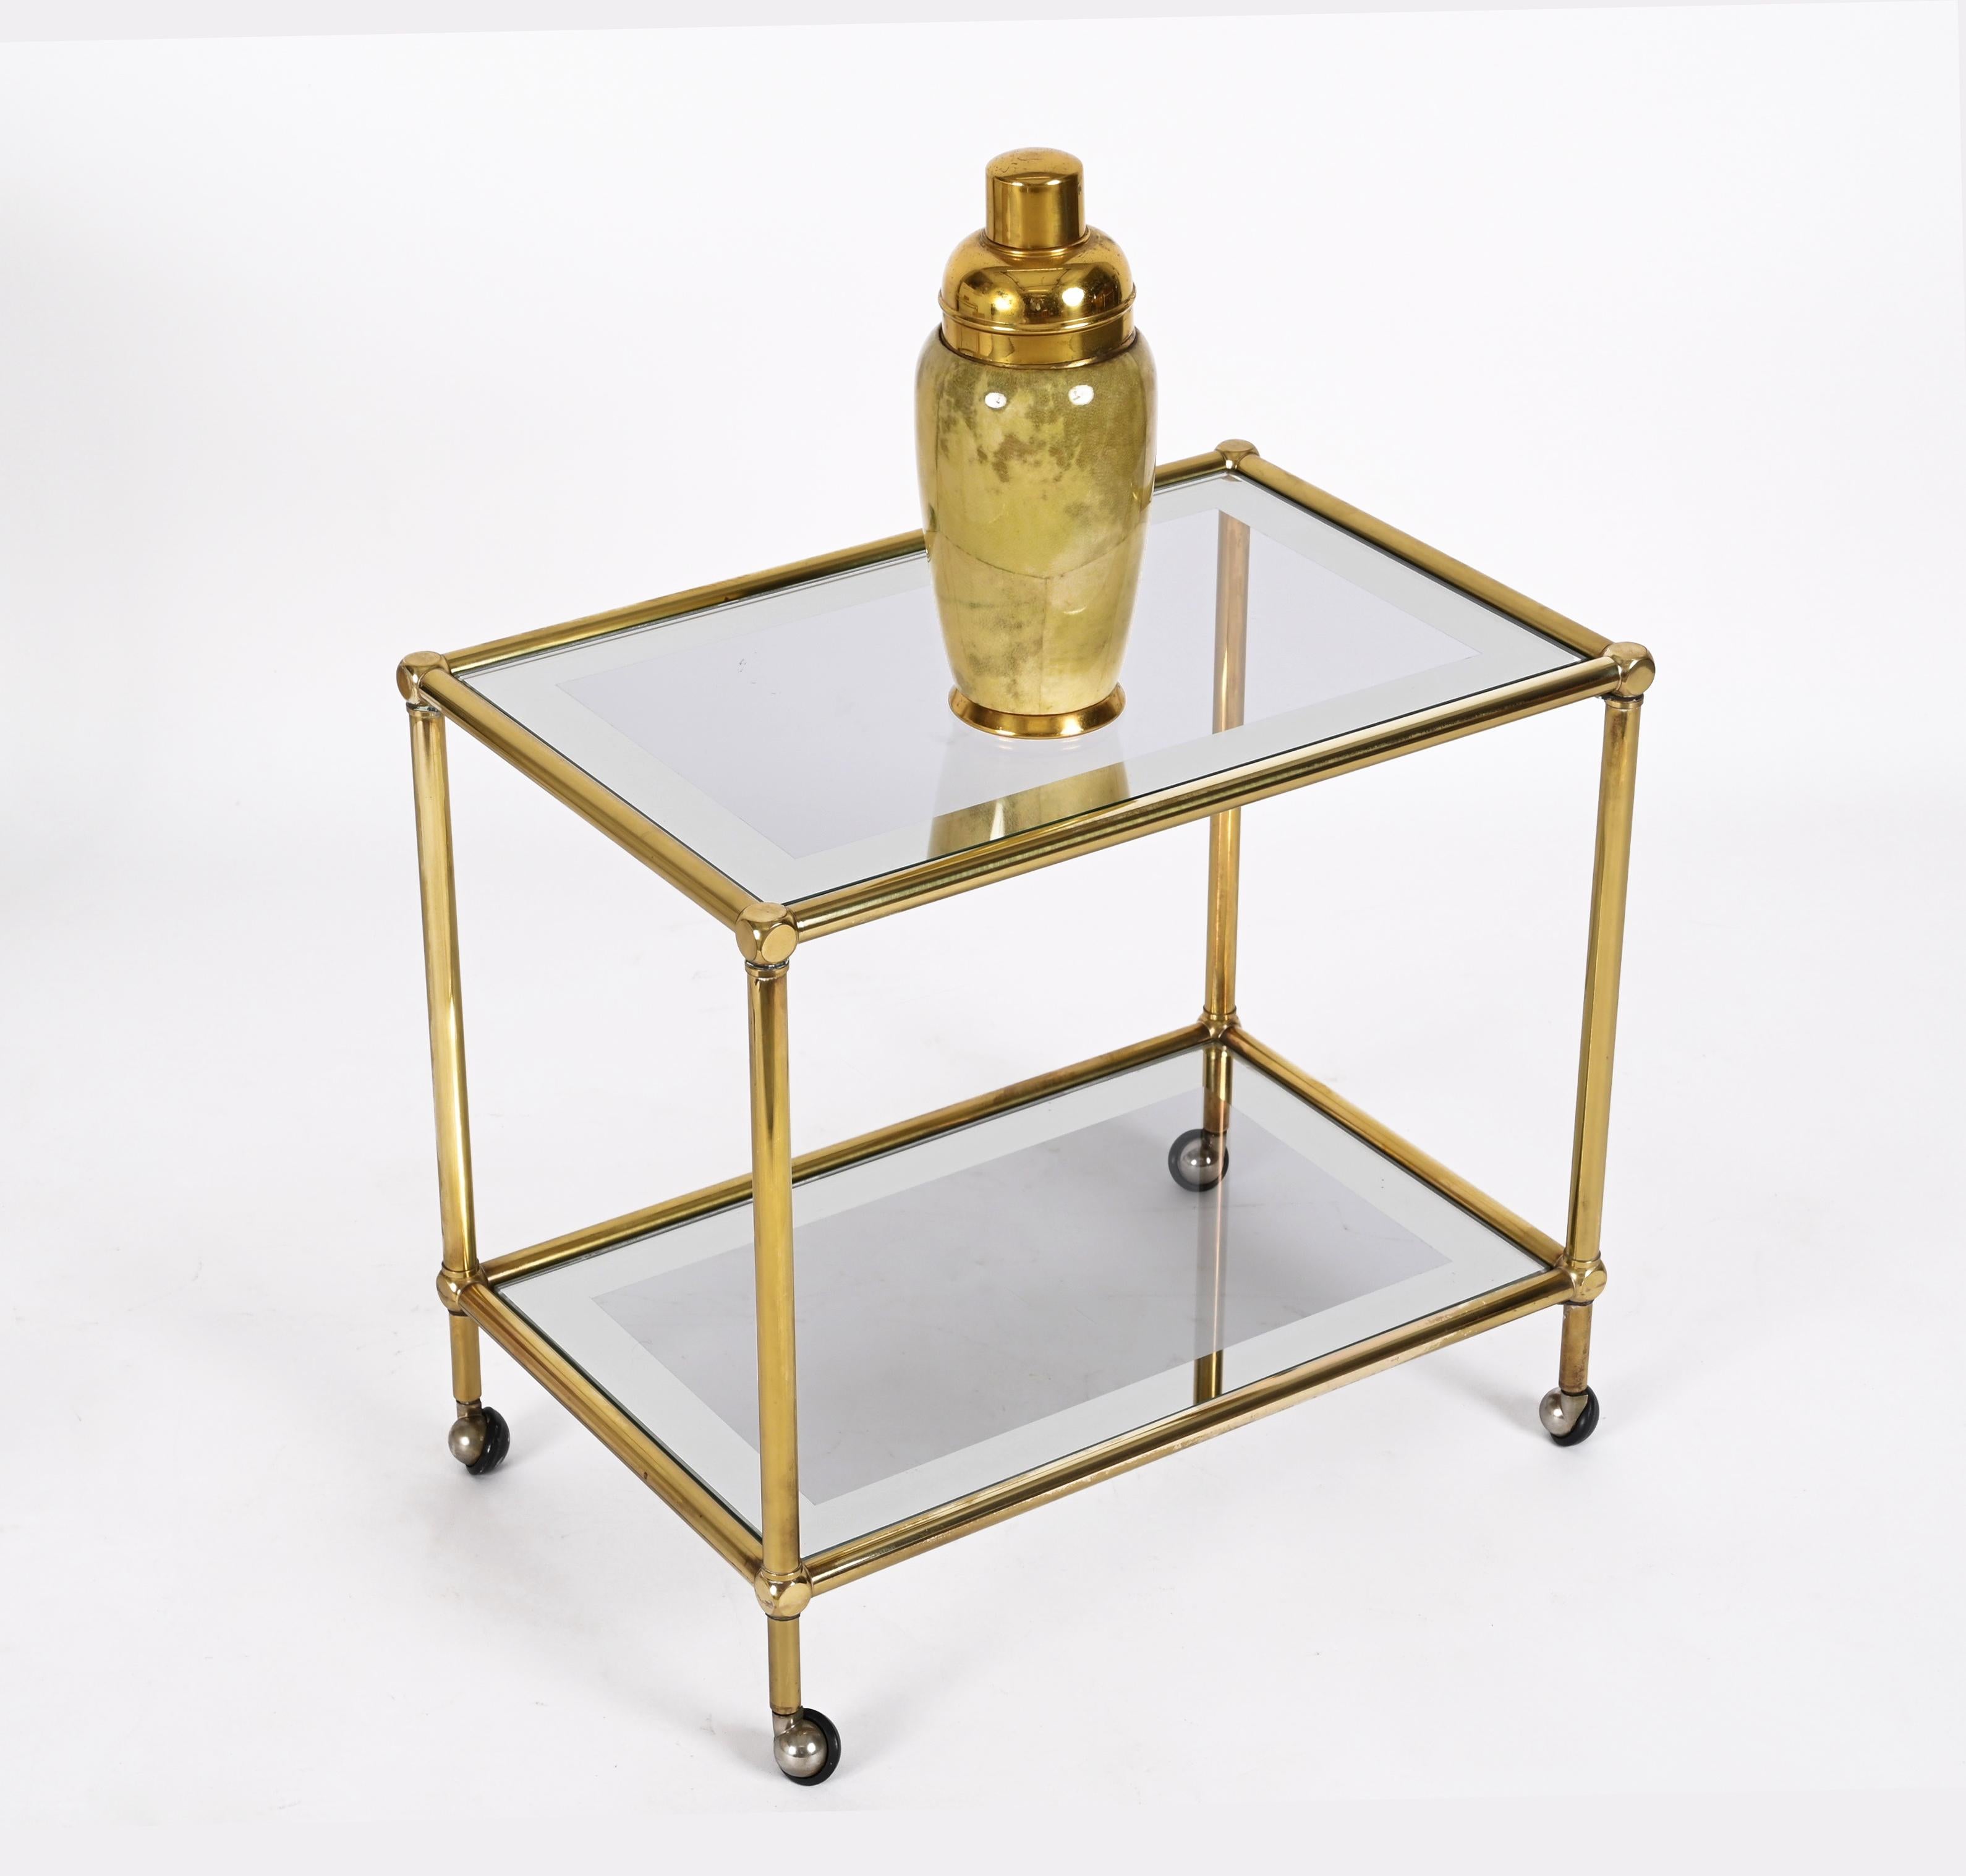 Set of Brass Mirrored Border with Glass Top Nesting Tables, Maison Jansen, 1970s For Sale 2